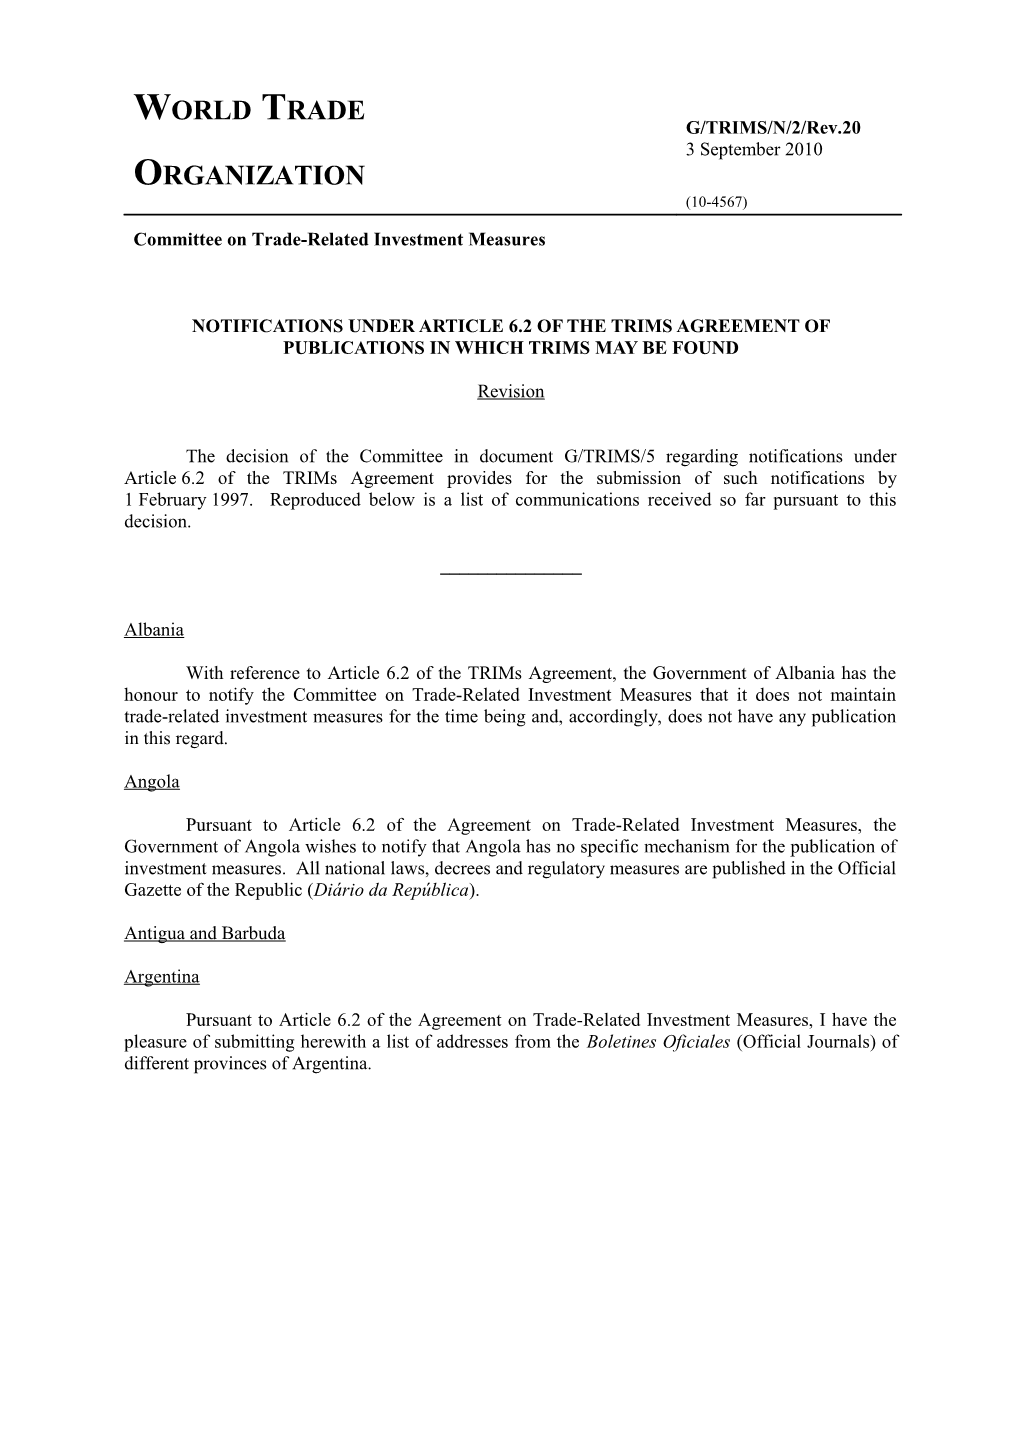 Notifications Under Article 6.2 of the Trims Agreement of Publications in Which Trims